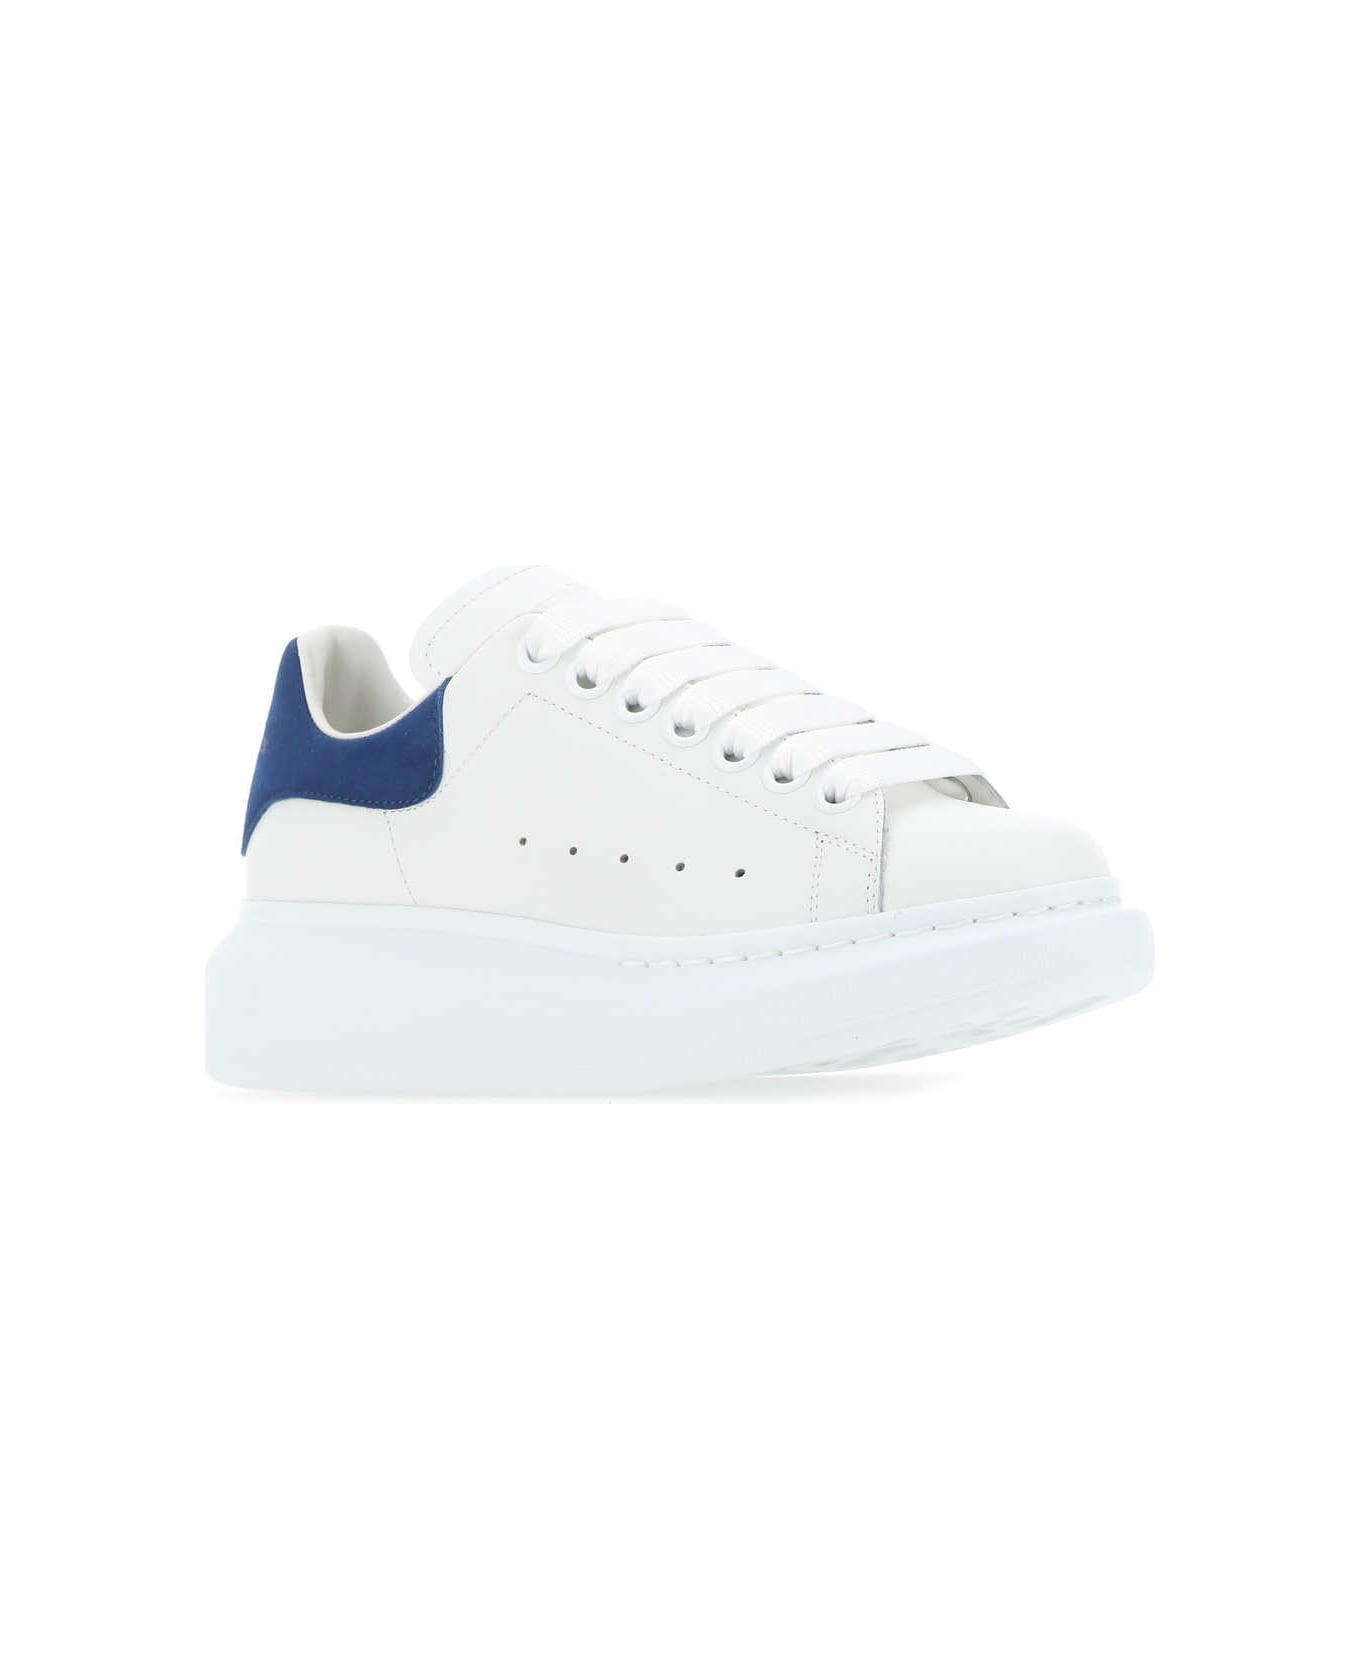 Alexander McQueen White Leather Sneakers With Blue Suede Heel - 9086 ウェッジシューズ